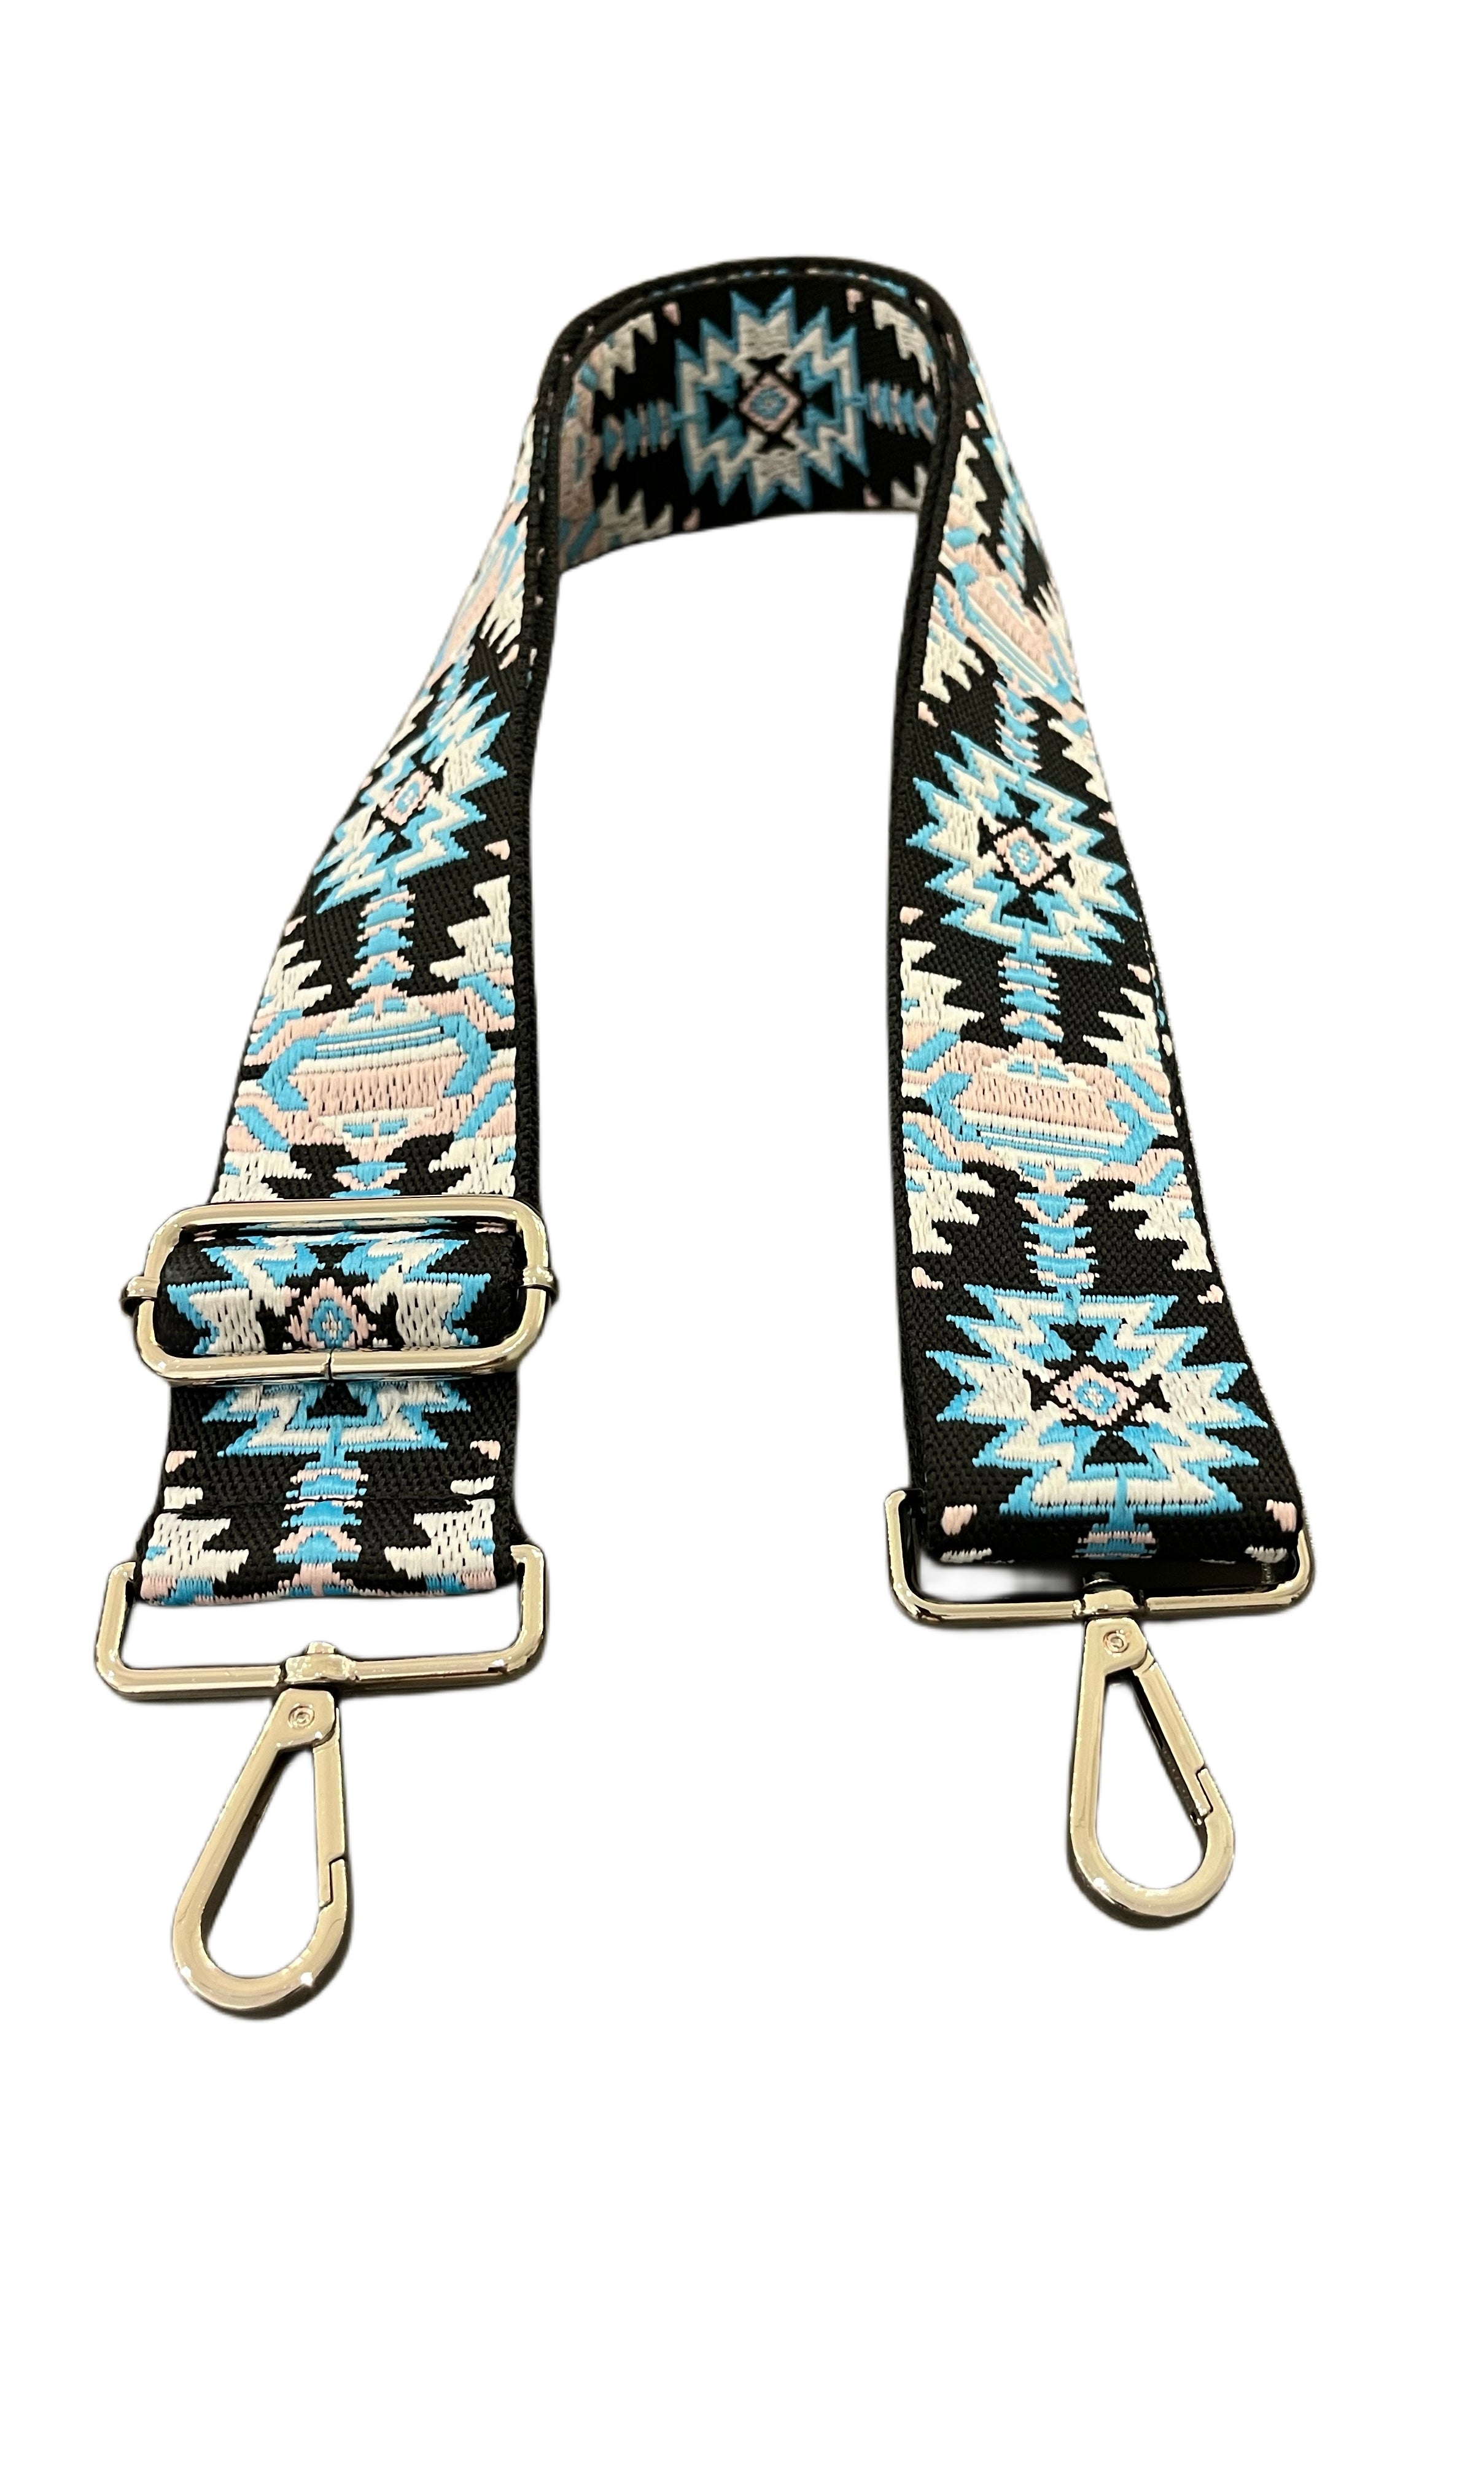 Bodinna Azteck Bag Strap-Made in Italy